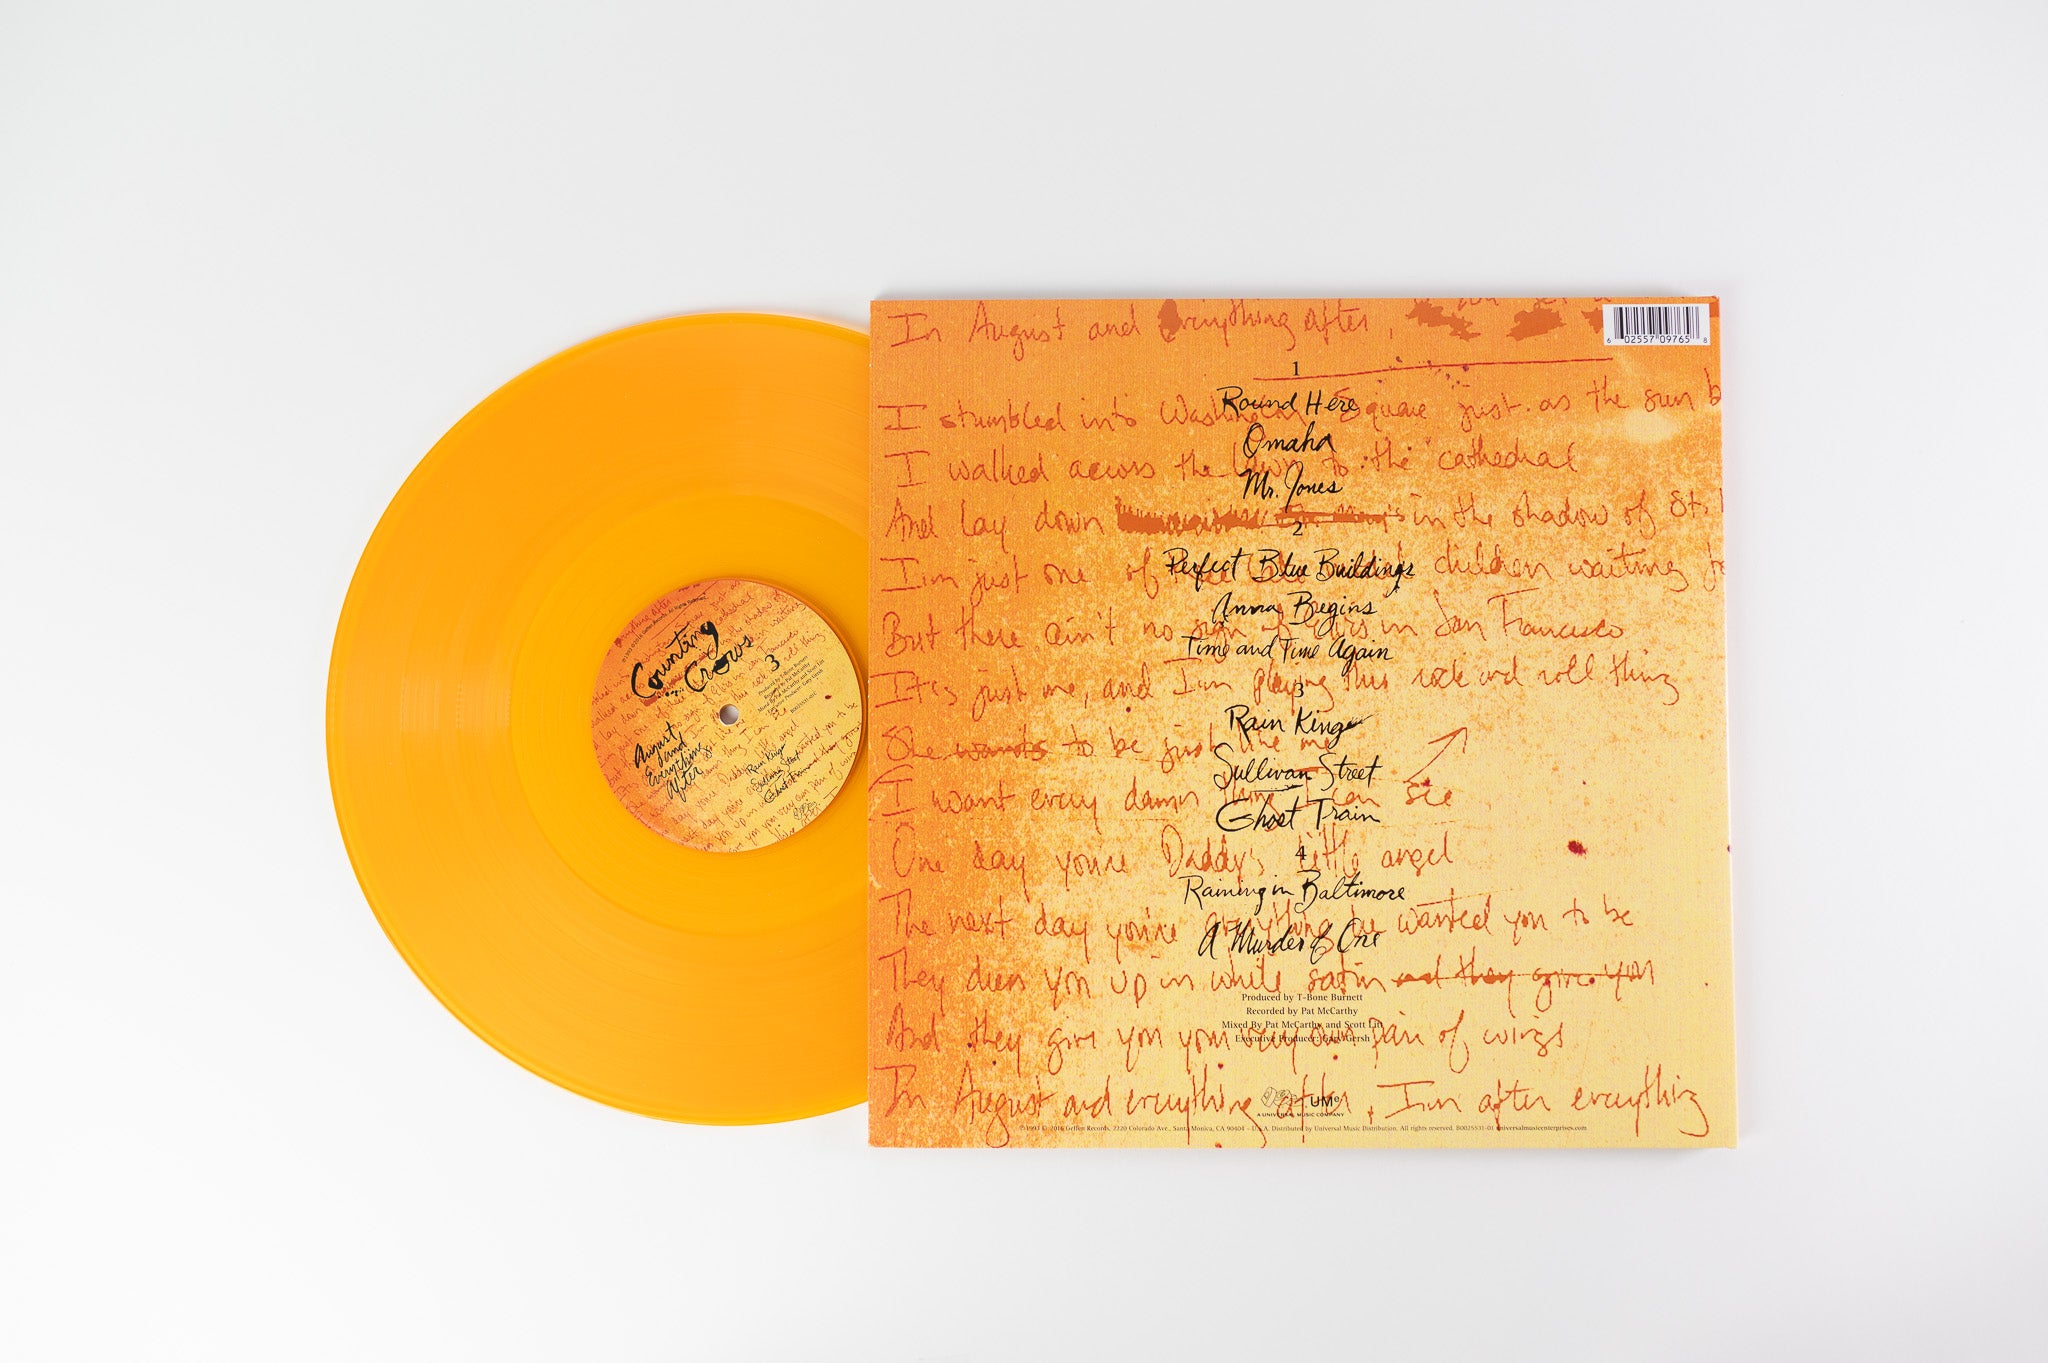 Counting Crows - August And Everything After on DGC Ltd Orange Vinyl Reissue